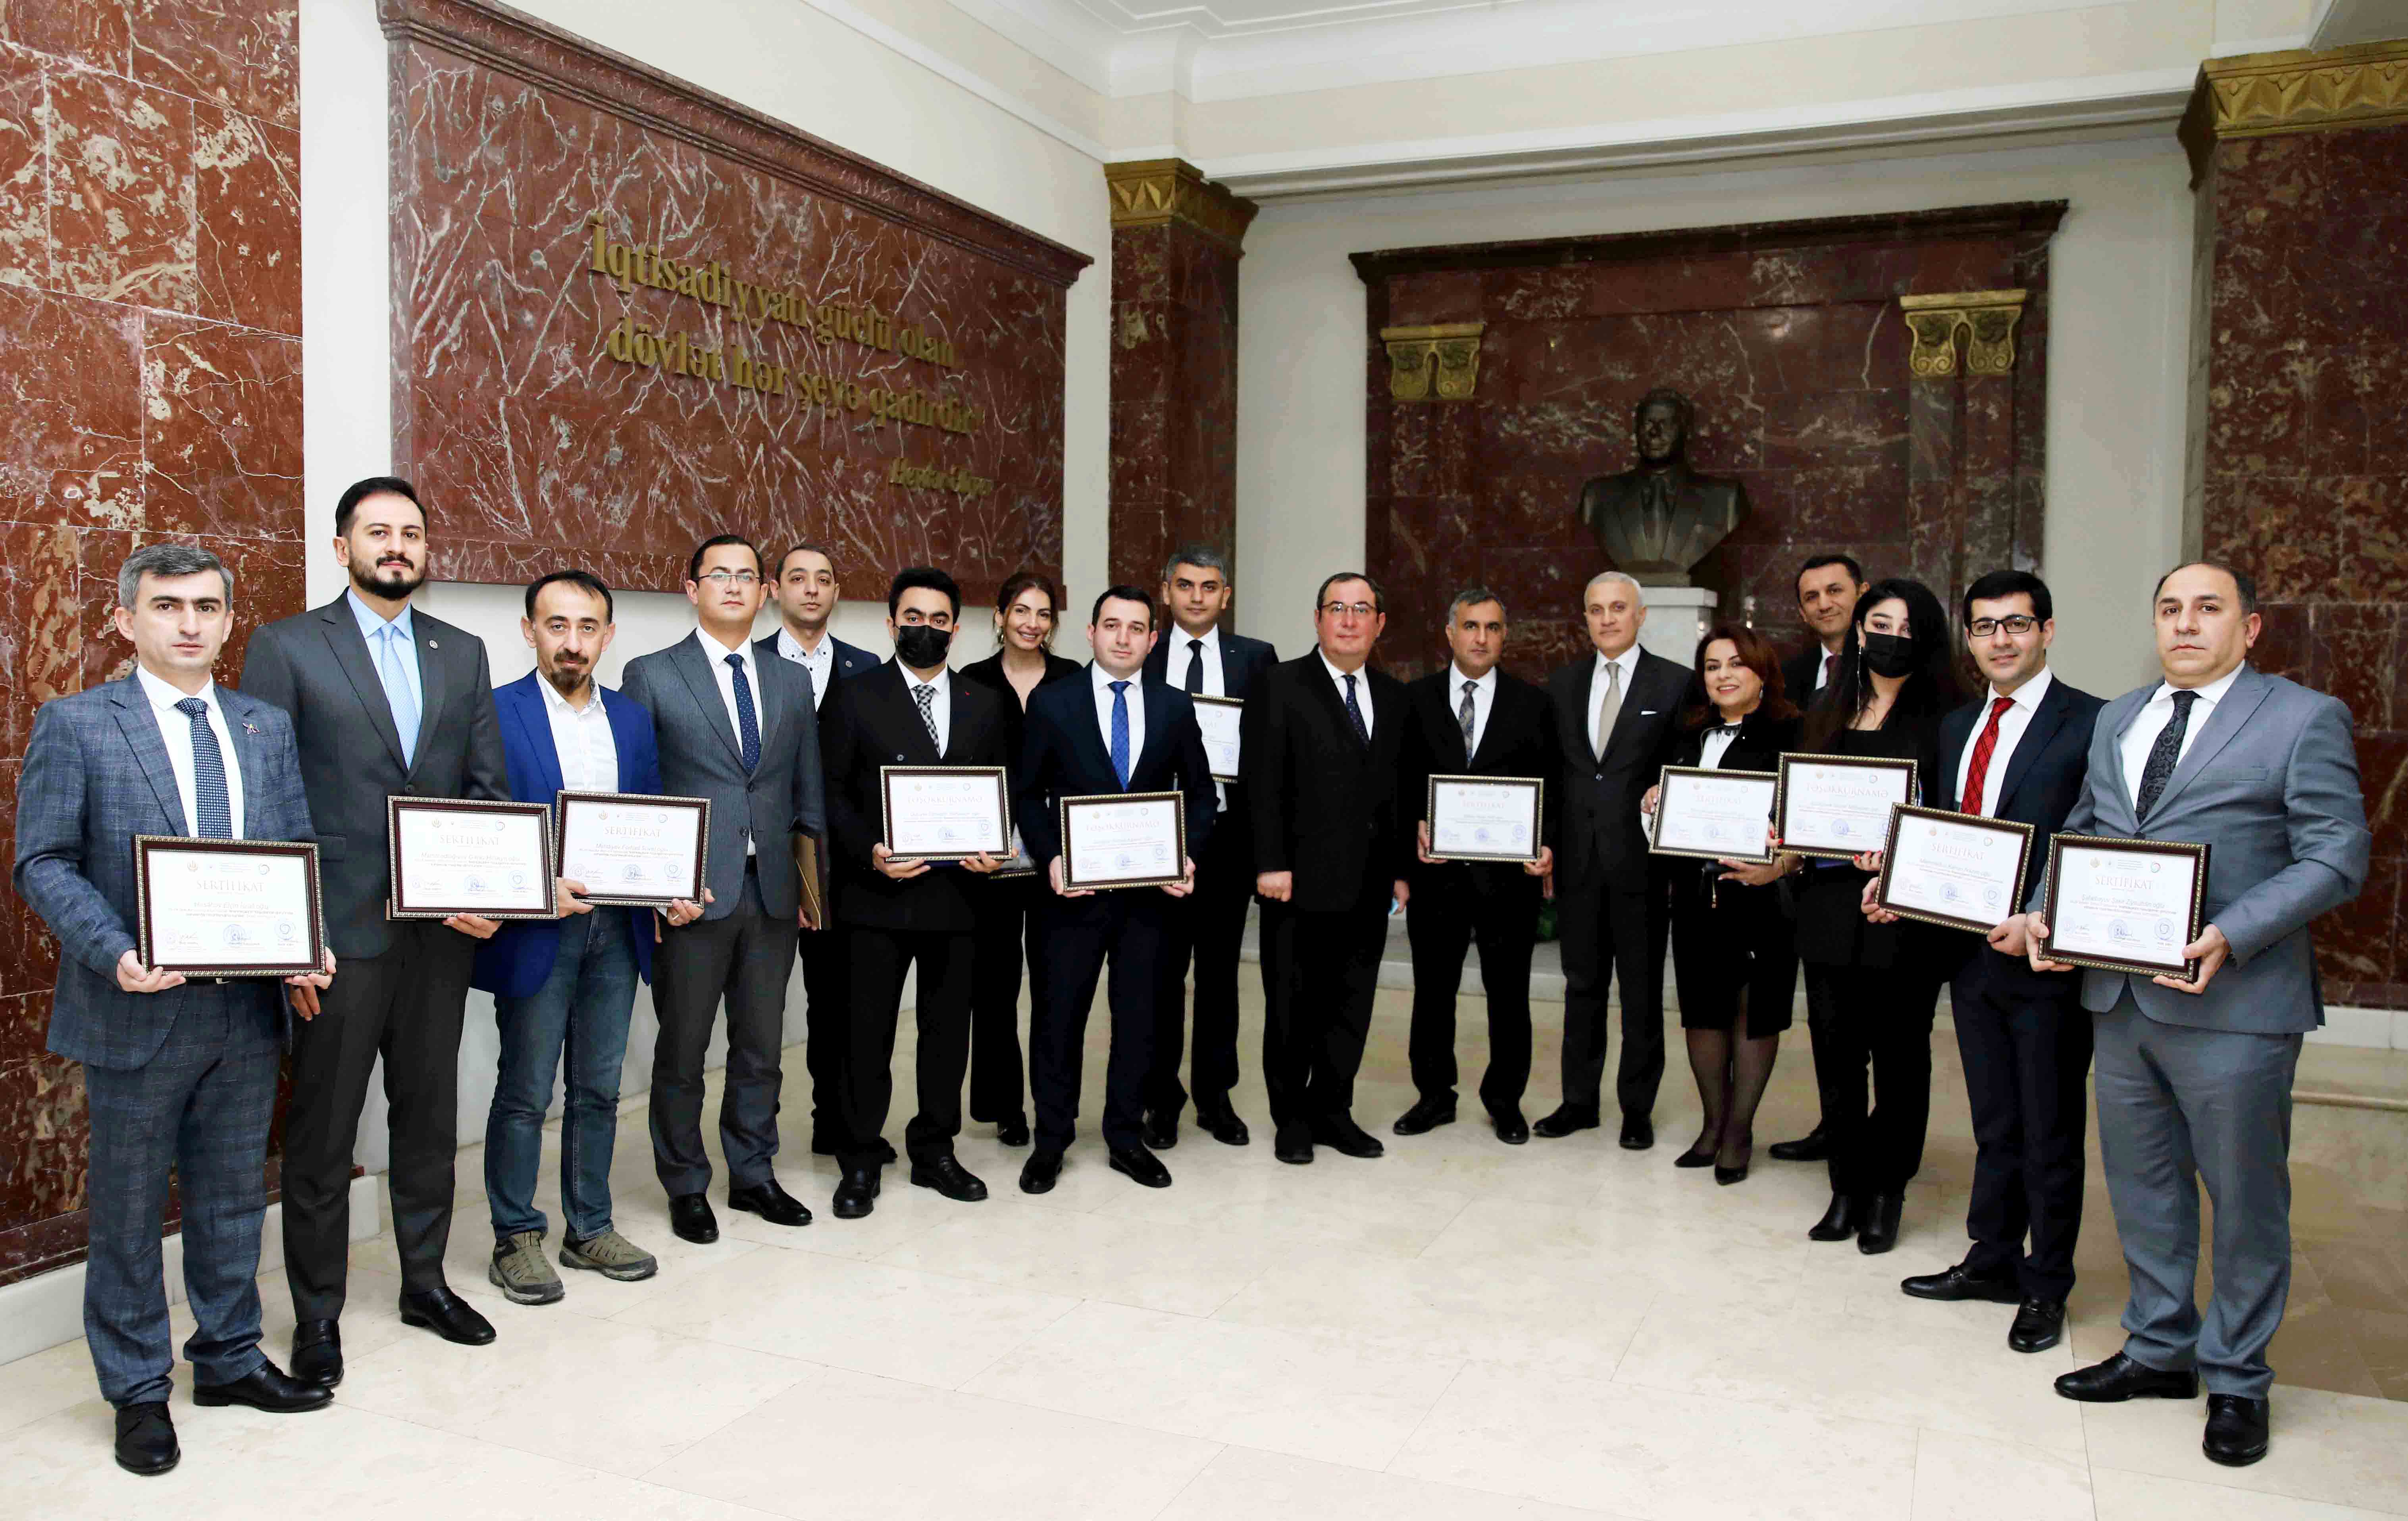 Certificates were presented to the mediators who participated in the training